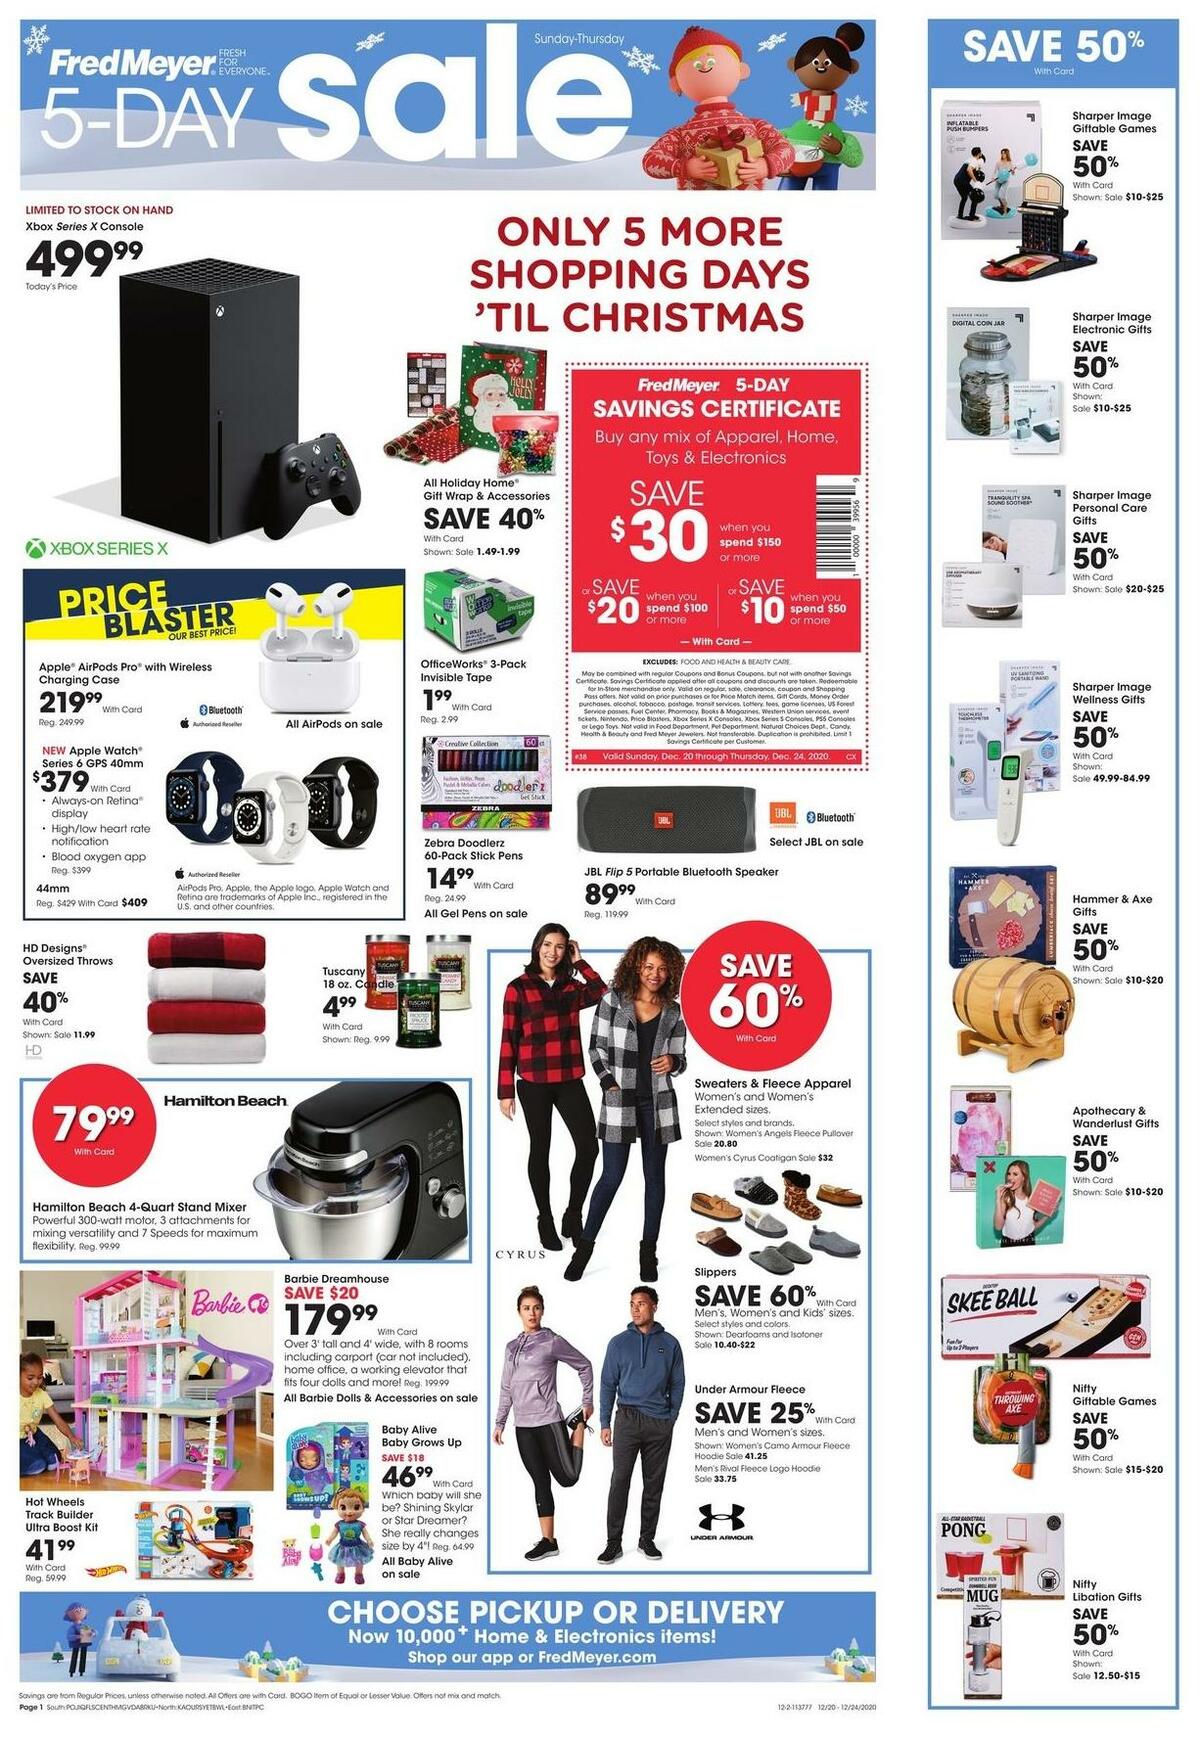 Fred Meyer Last 5 Days to Save Weekly Ad from December 20